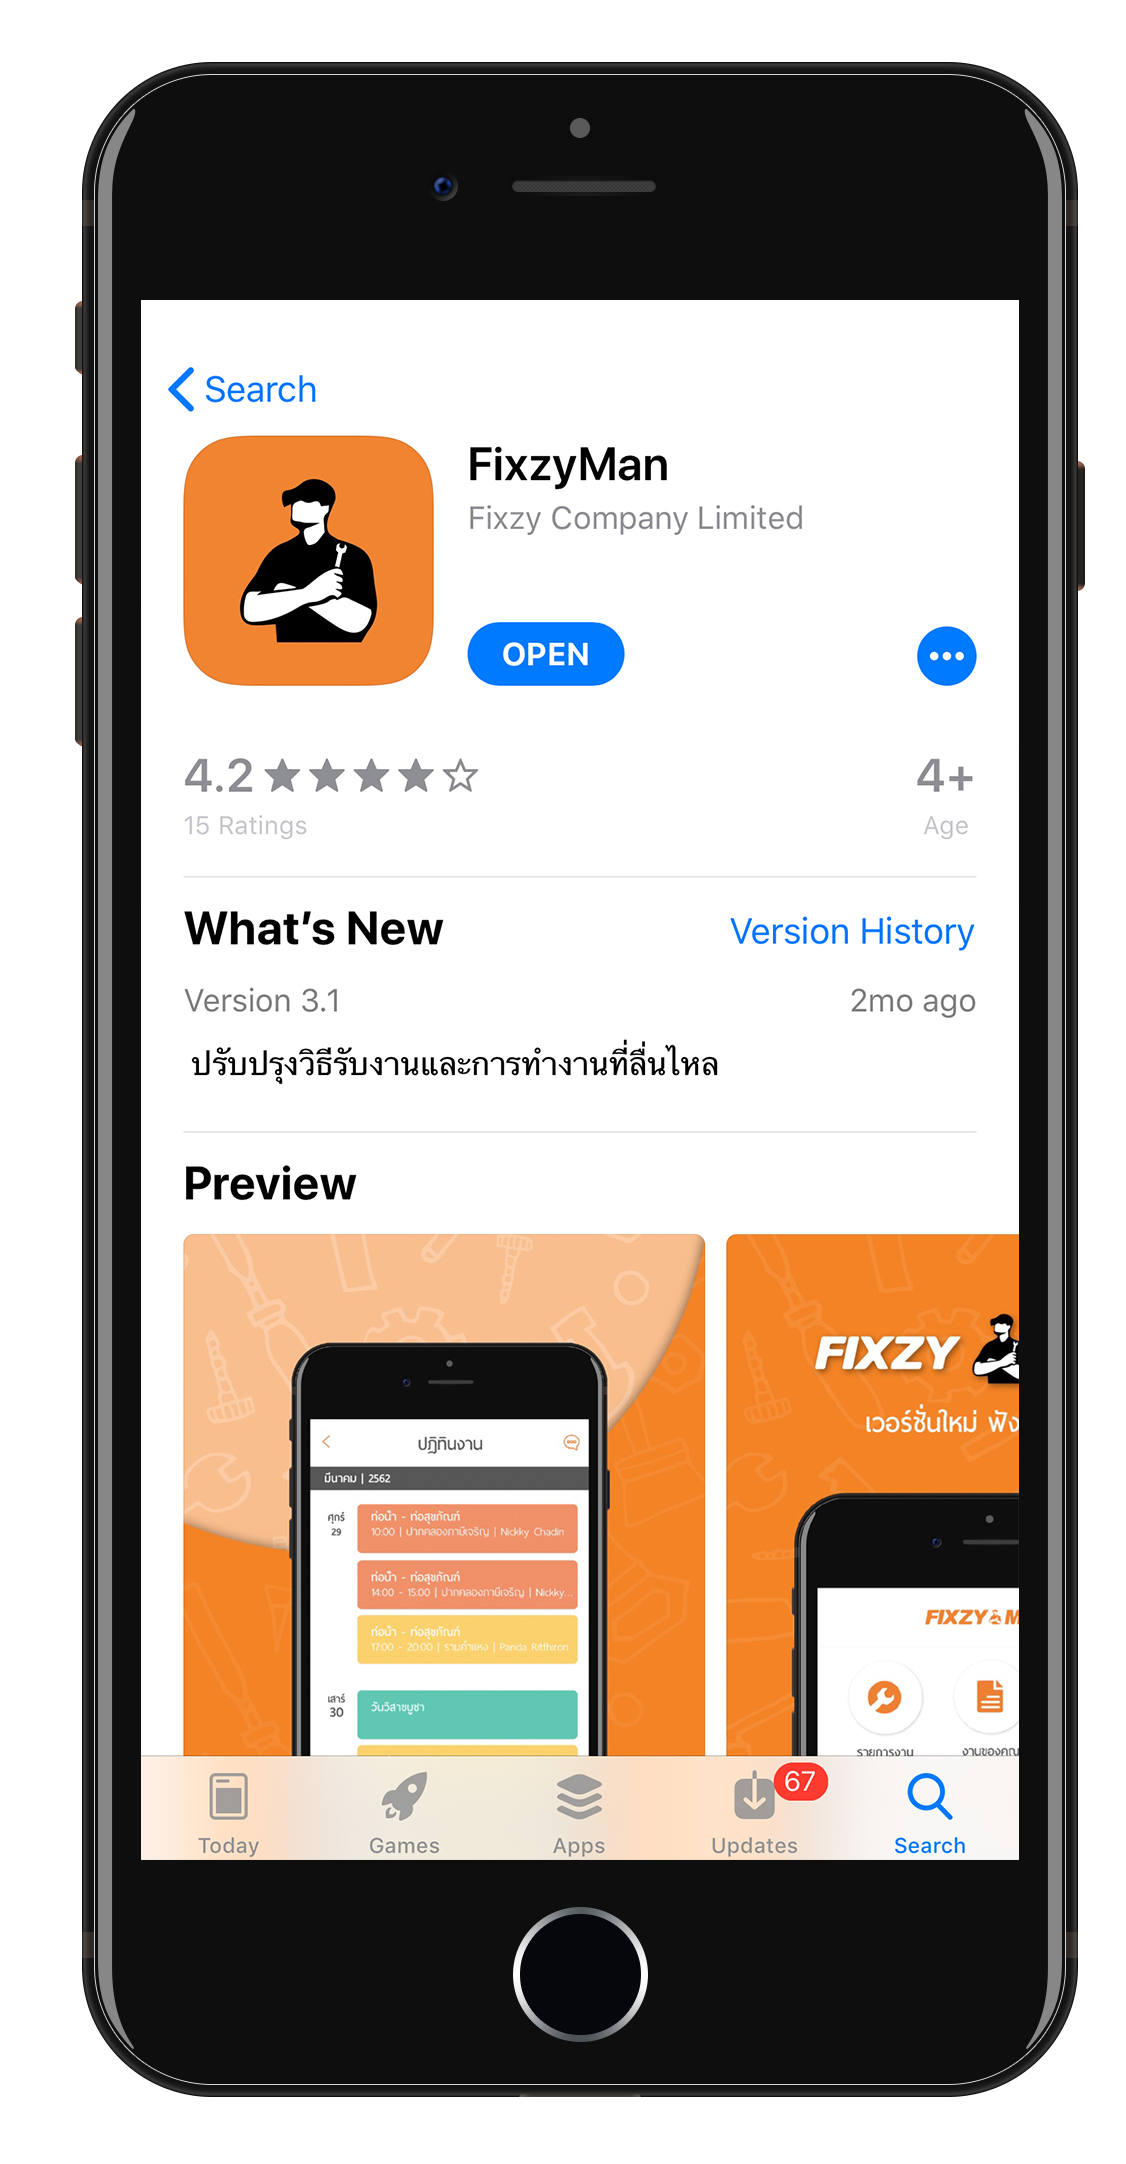 1. Download the Fixzy Man application